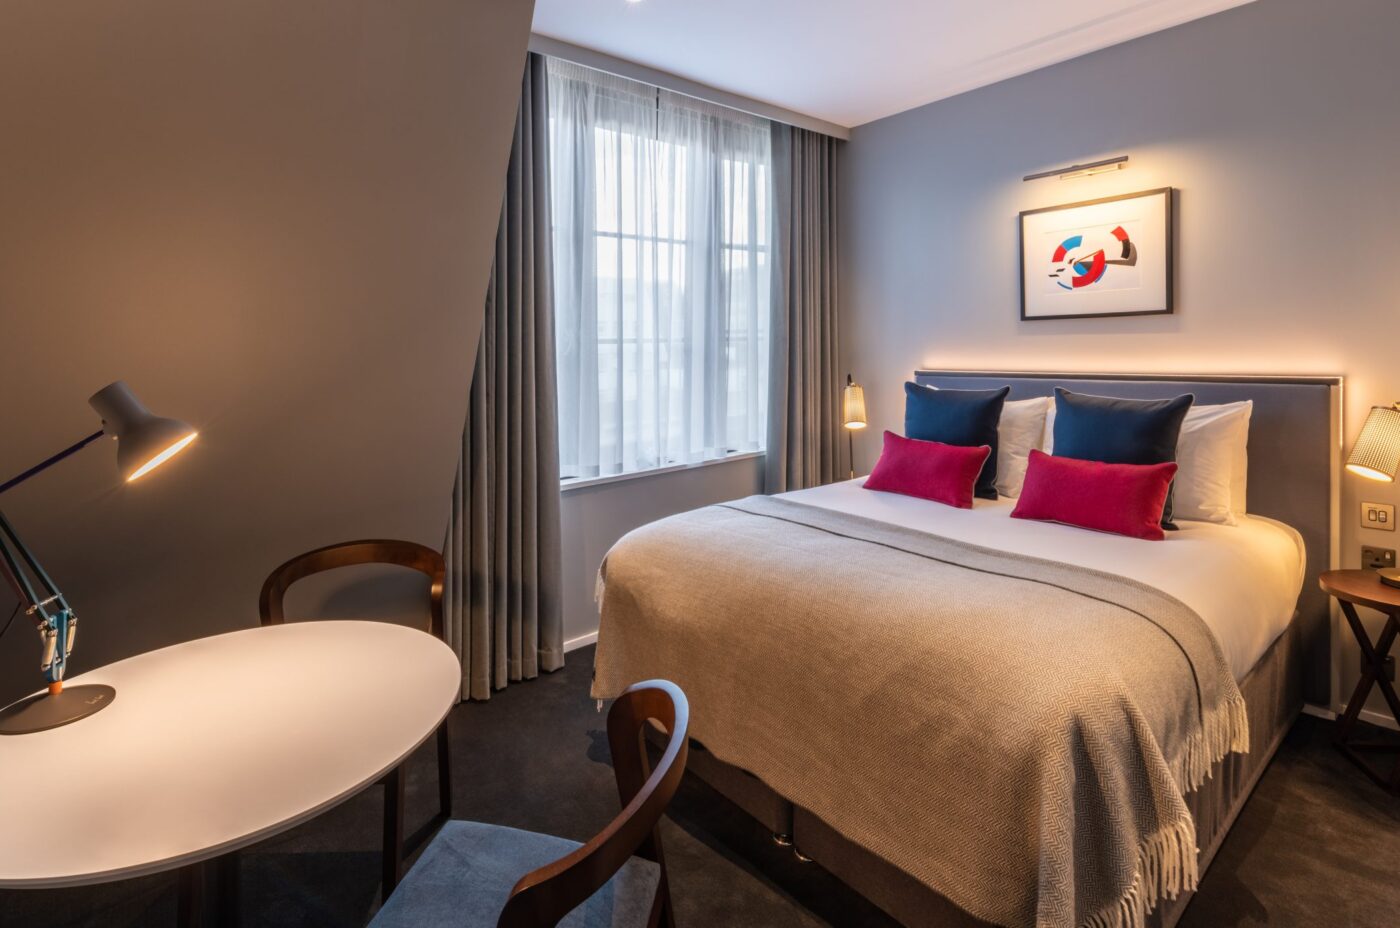 Standard double room with a dining table and double bed, located in Covent Garden.